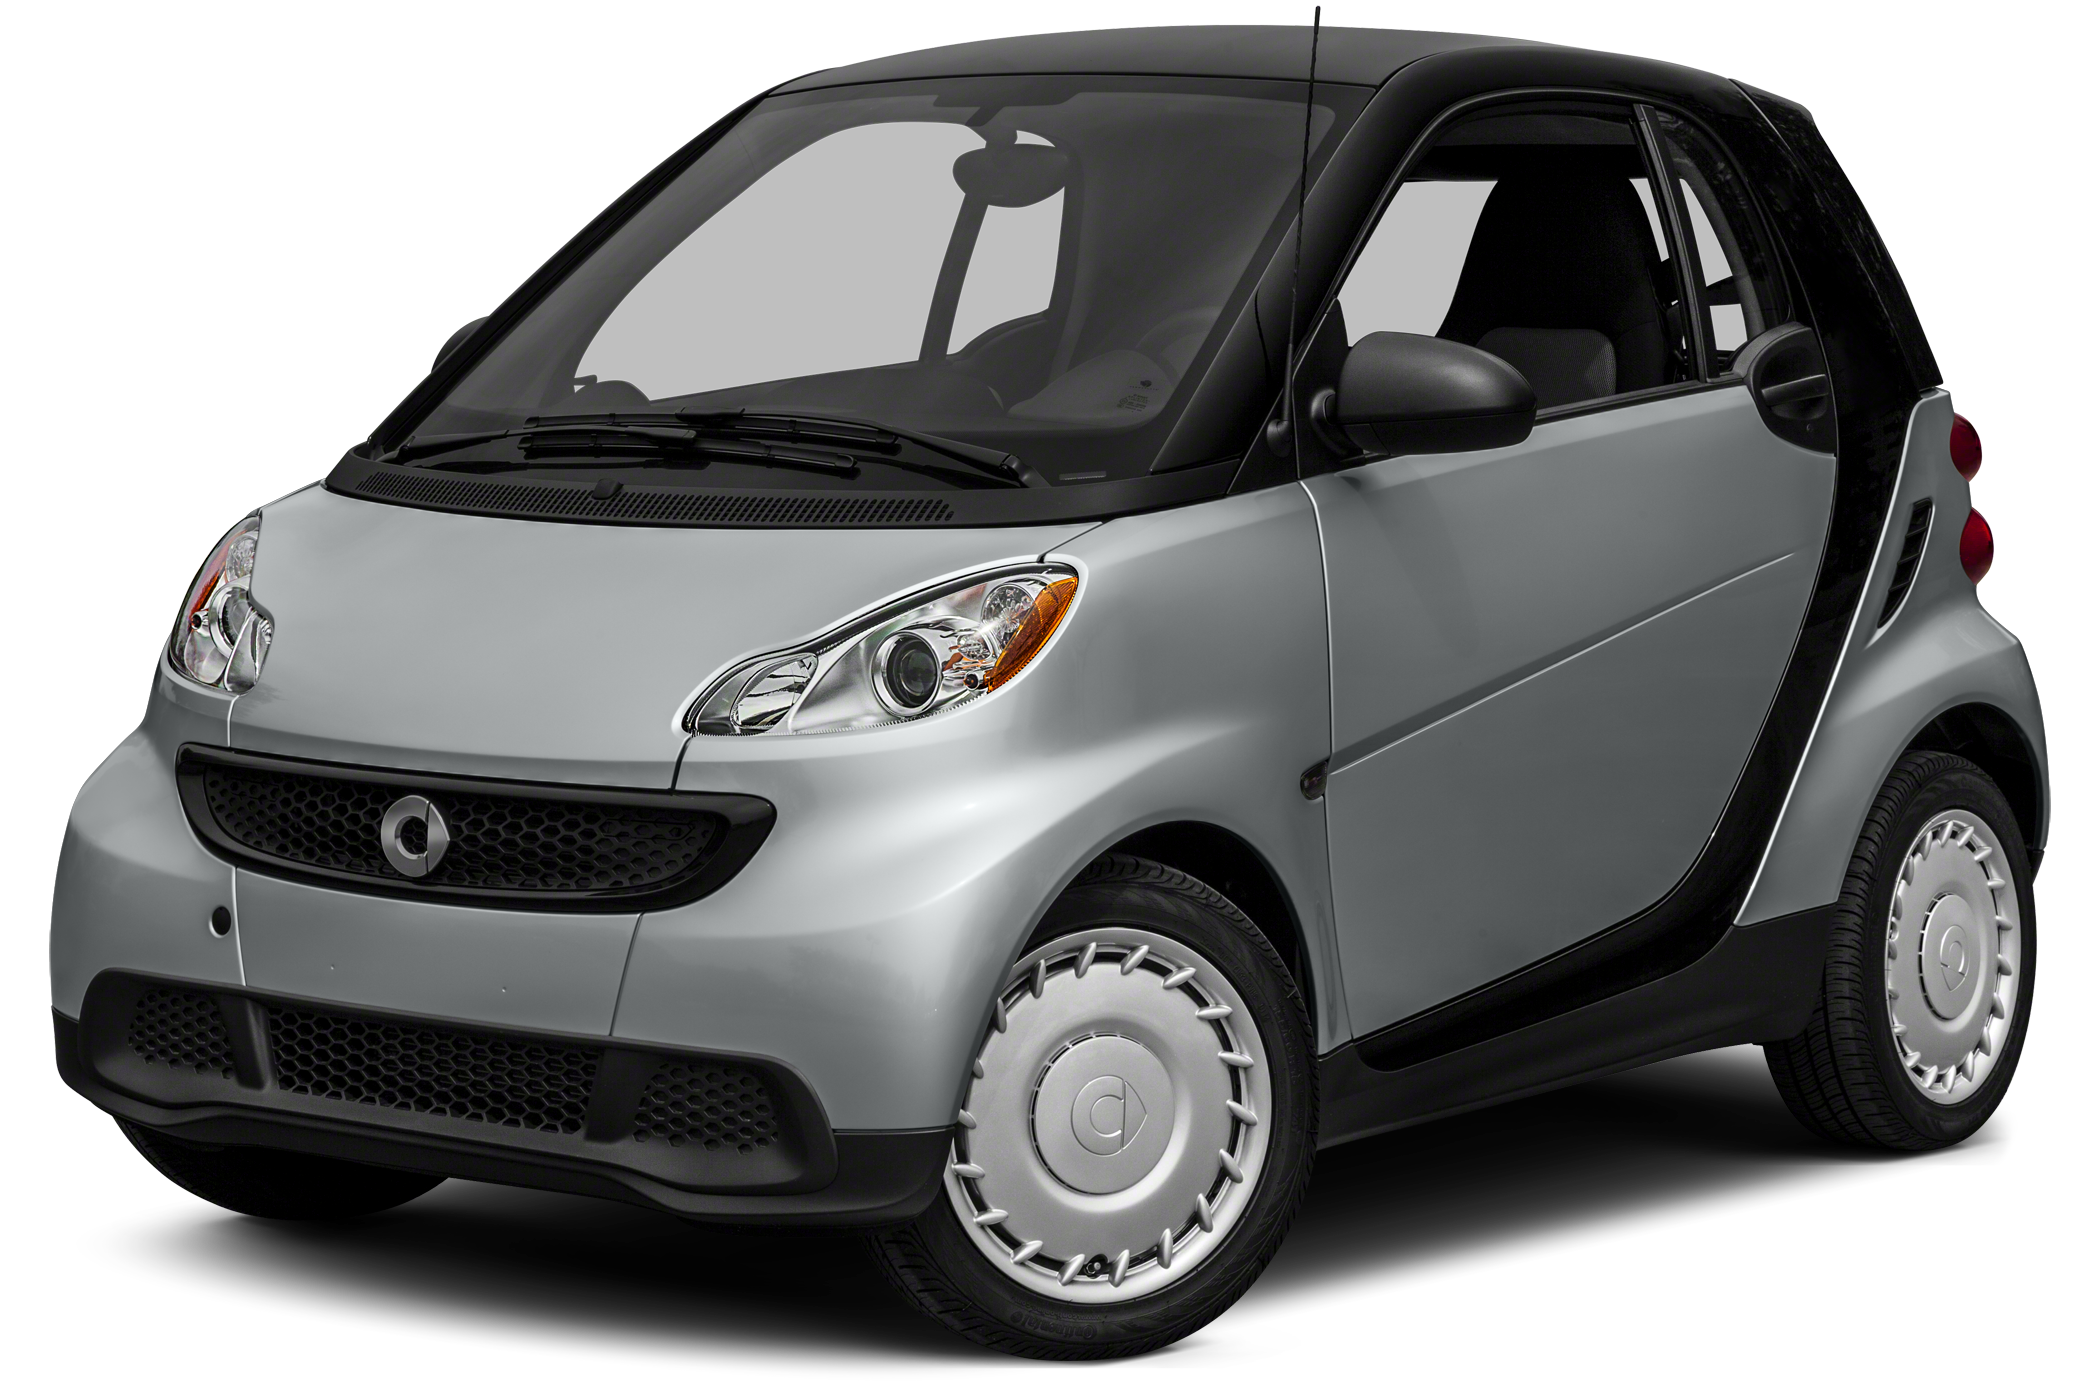 2015 smart ForTwo